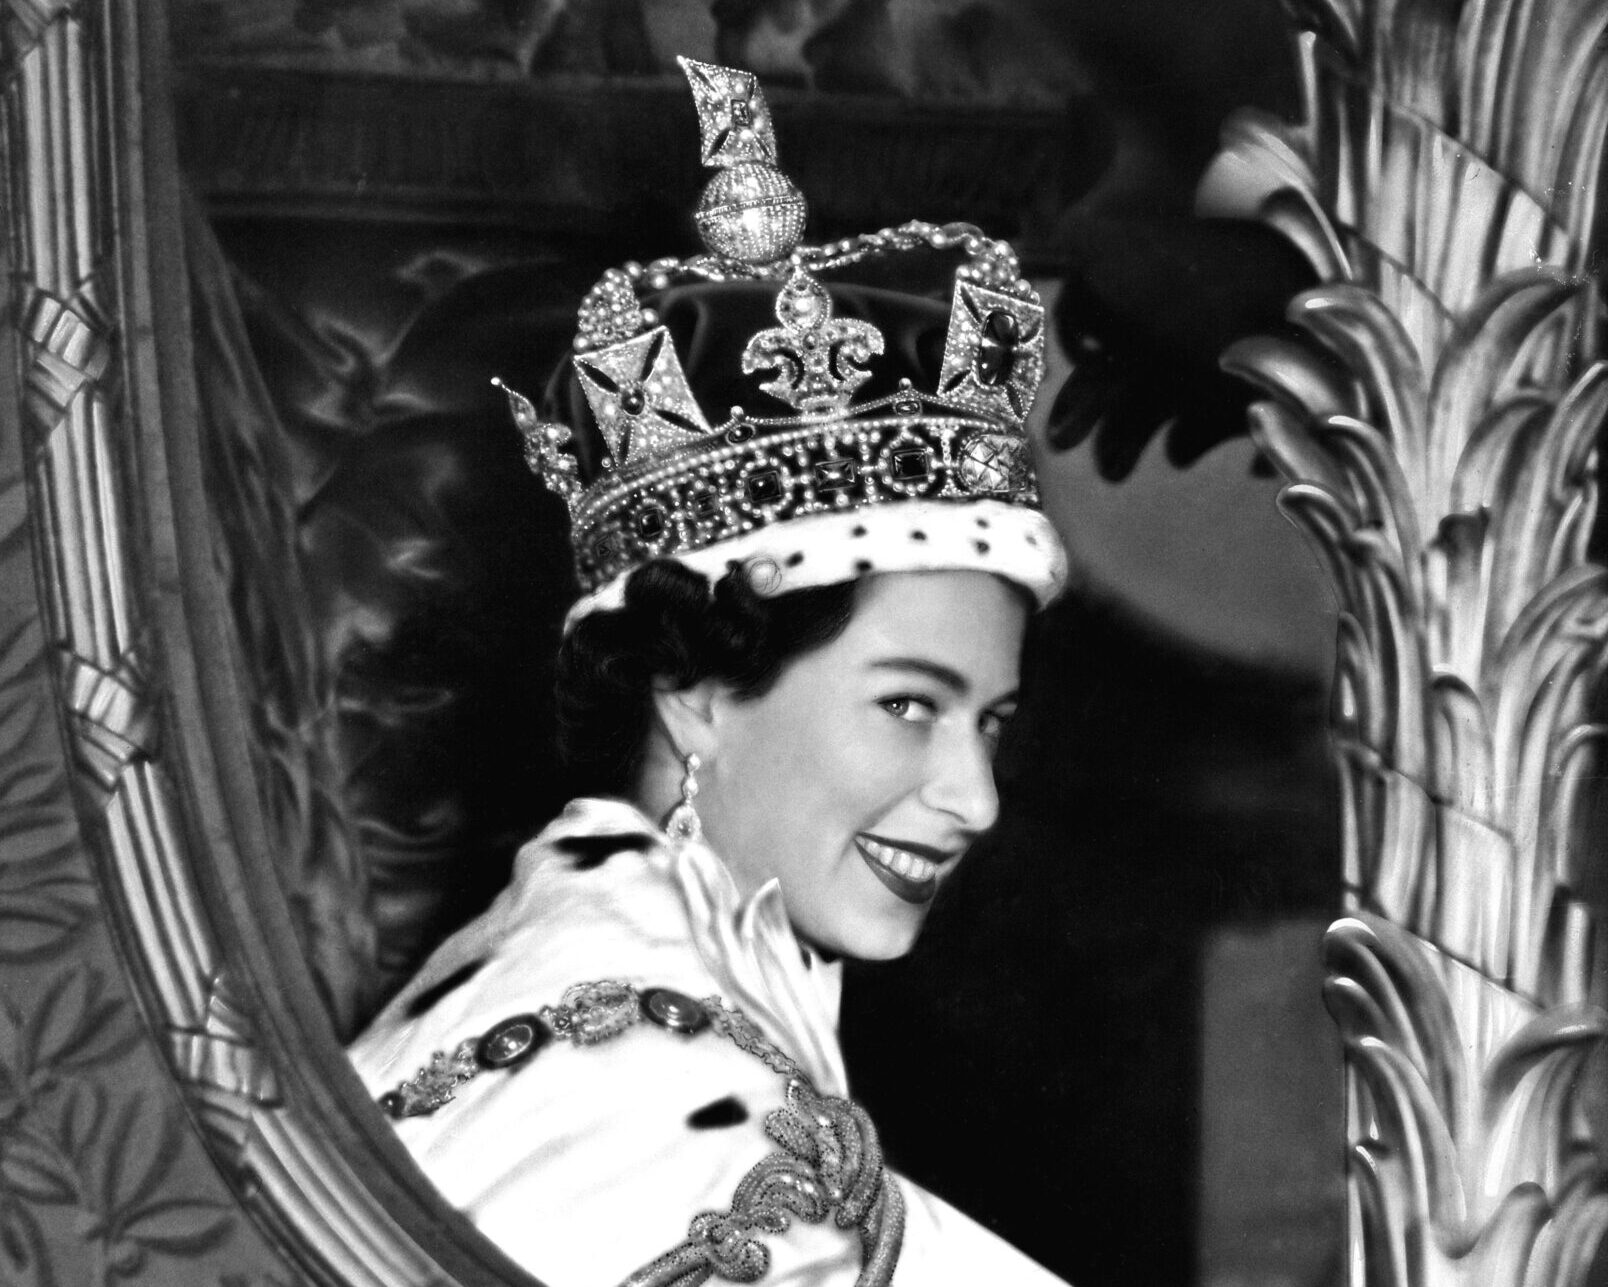 Queen Elizabeth II, who succeeded her father King George VI on February 6, 1952, after her coronation ceremony in Westminster Abbey, London